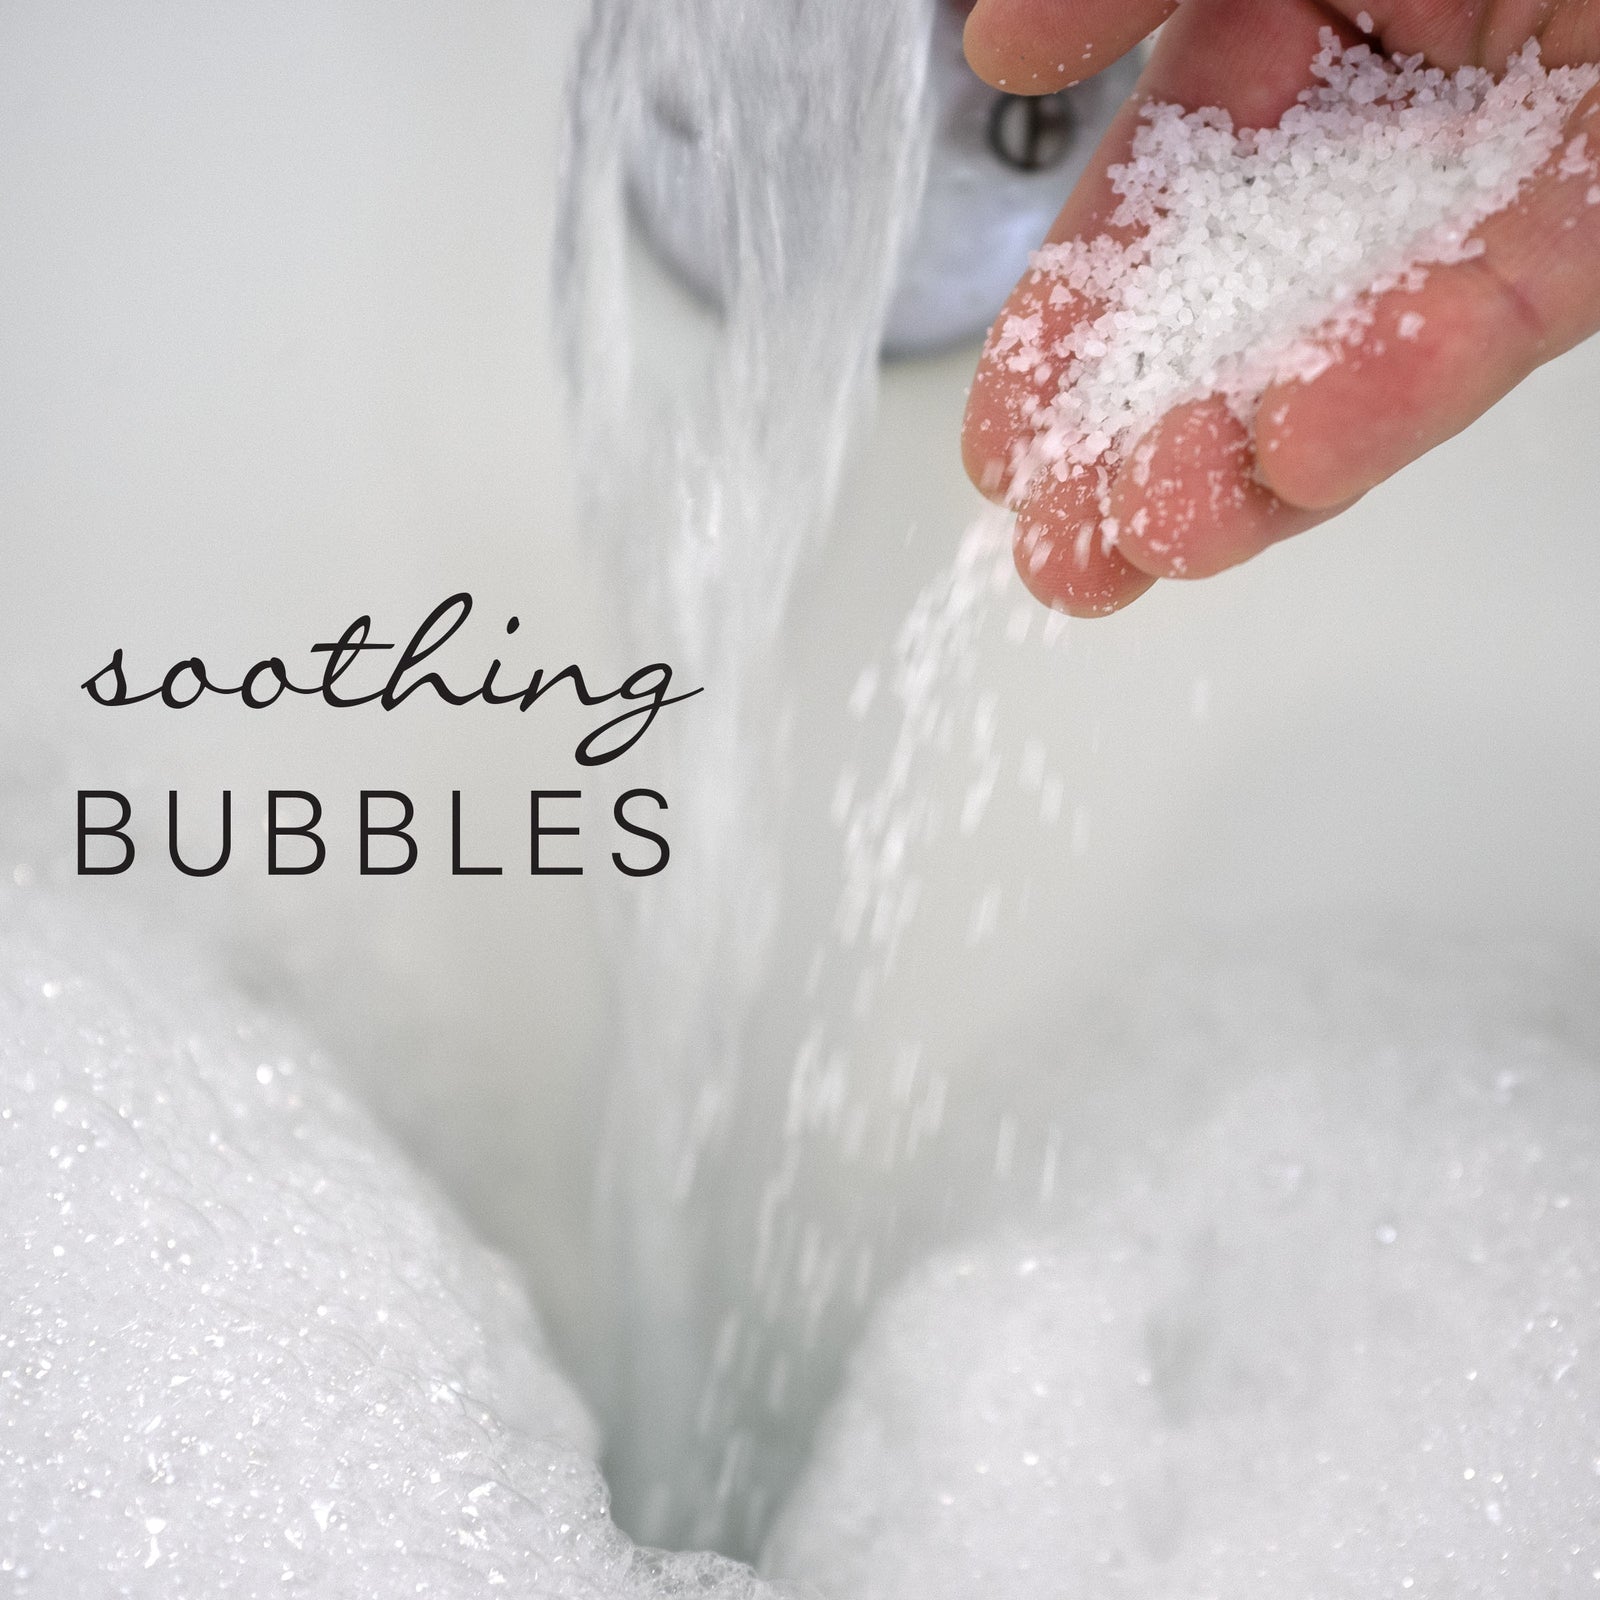 Soothing Bubbles